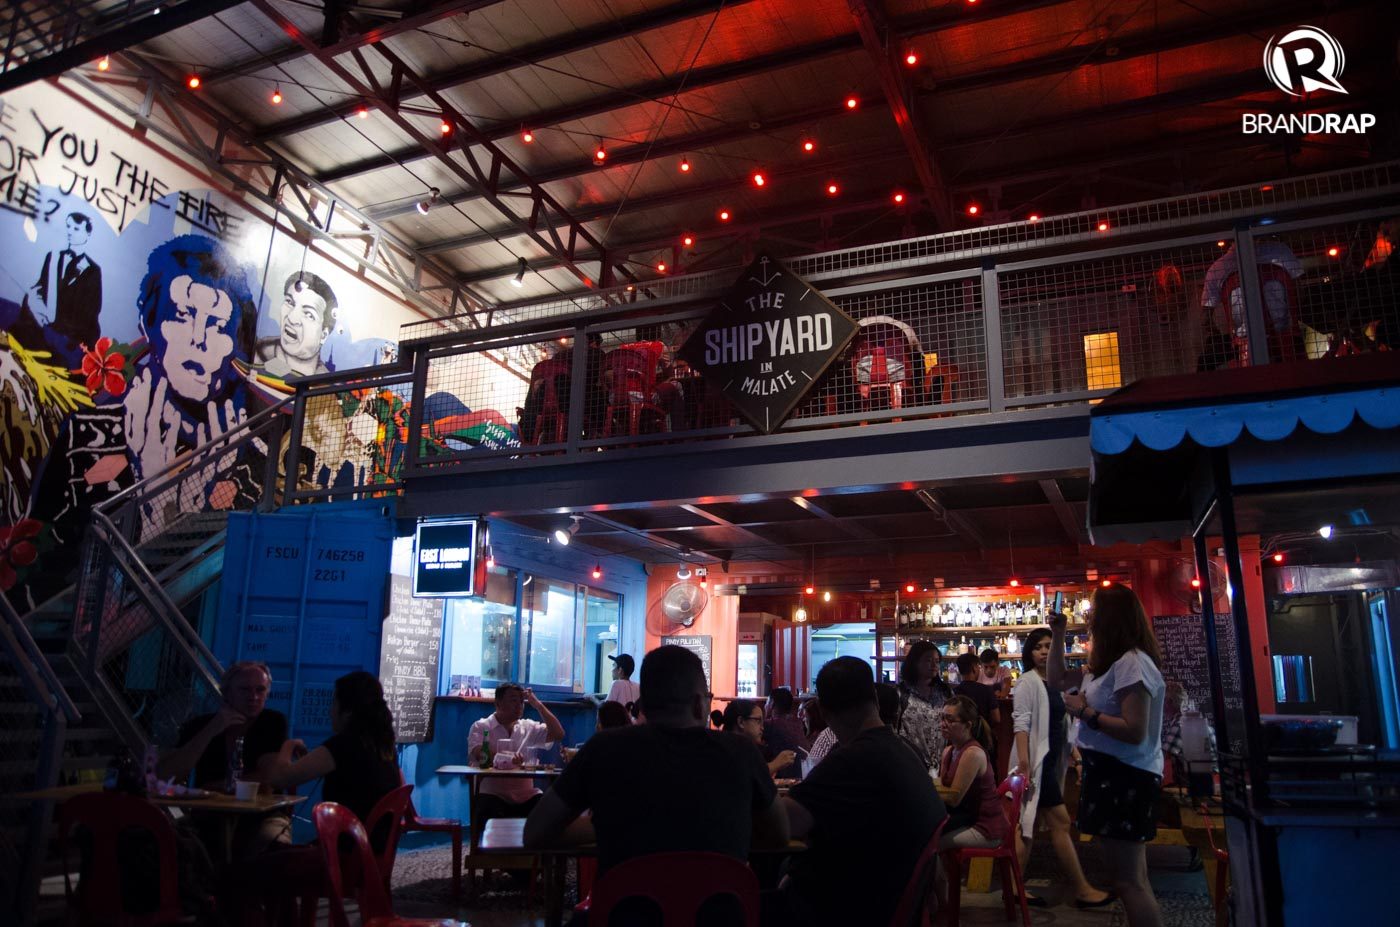 STANDOUT. Shipyard sits amid the restaurants and KTVs in Malate, serving up good pulutan fare, drinks, and music. Photo by Pauee Cadaing/Rappler 